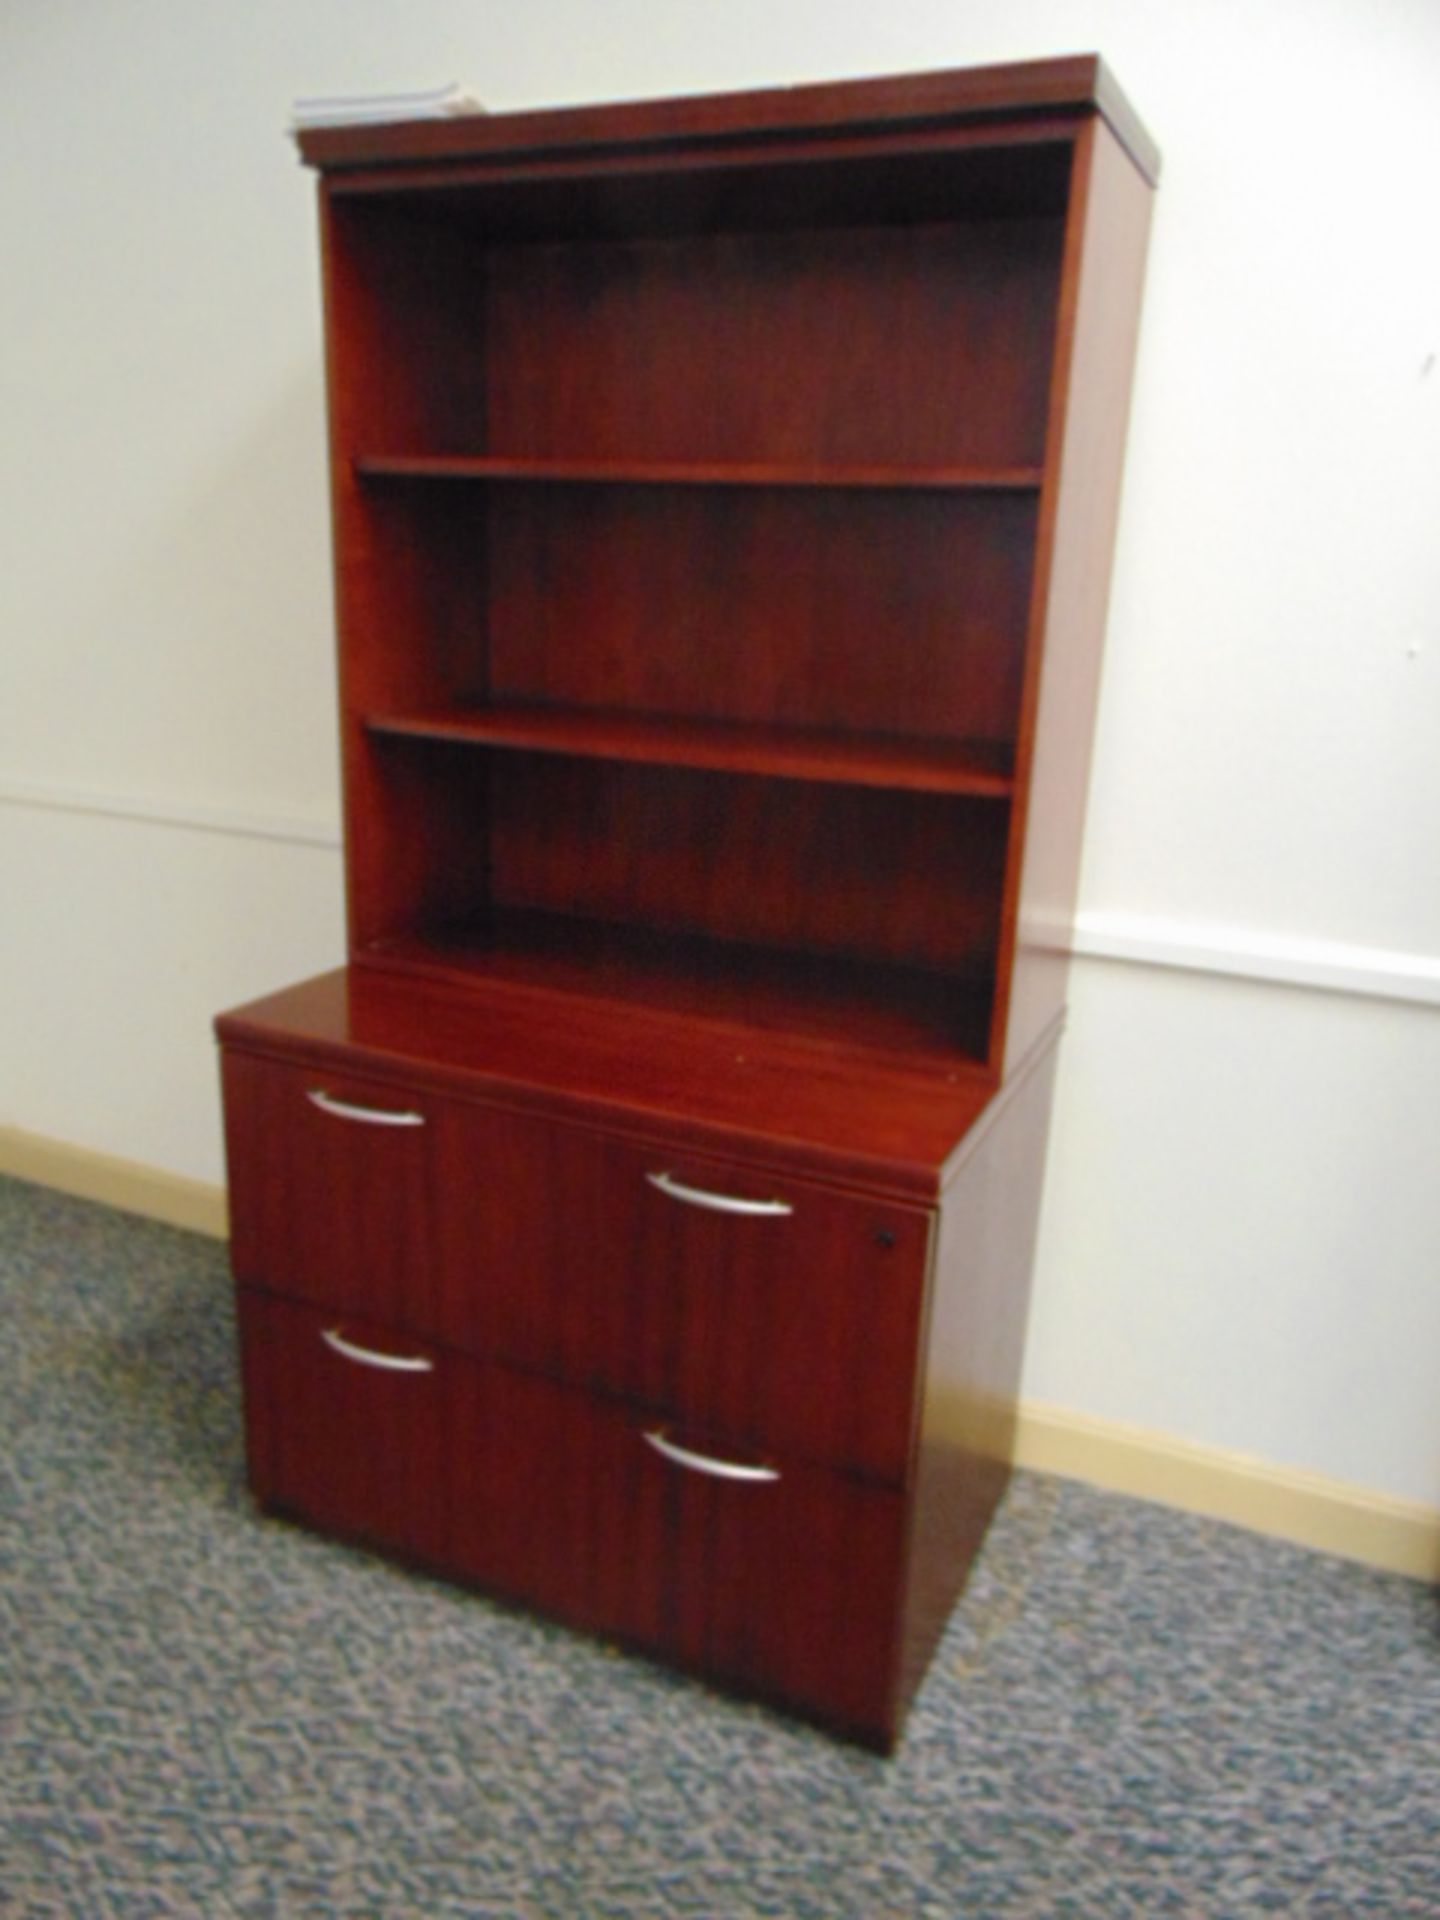 LOT CONSISTING OF: V-shaped wood desk, lateral file cabinet, bookcase, round table & (5) chairs - Image 3 of 3